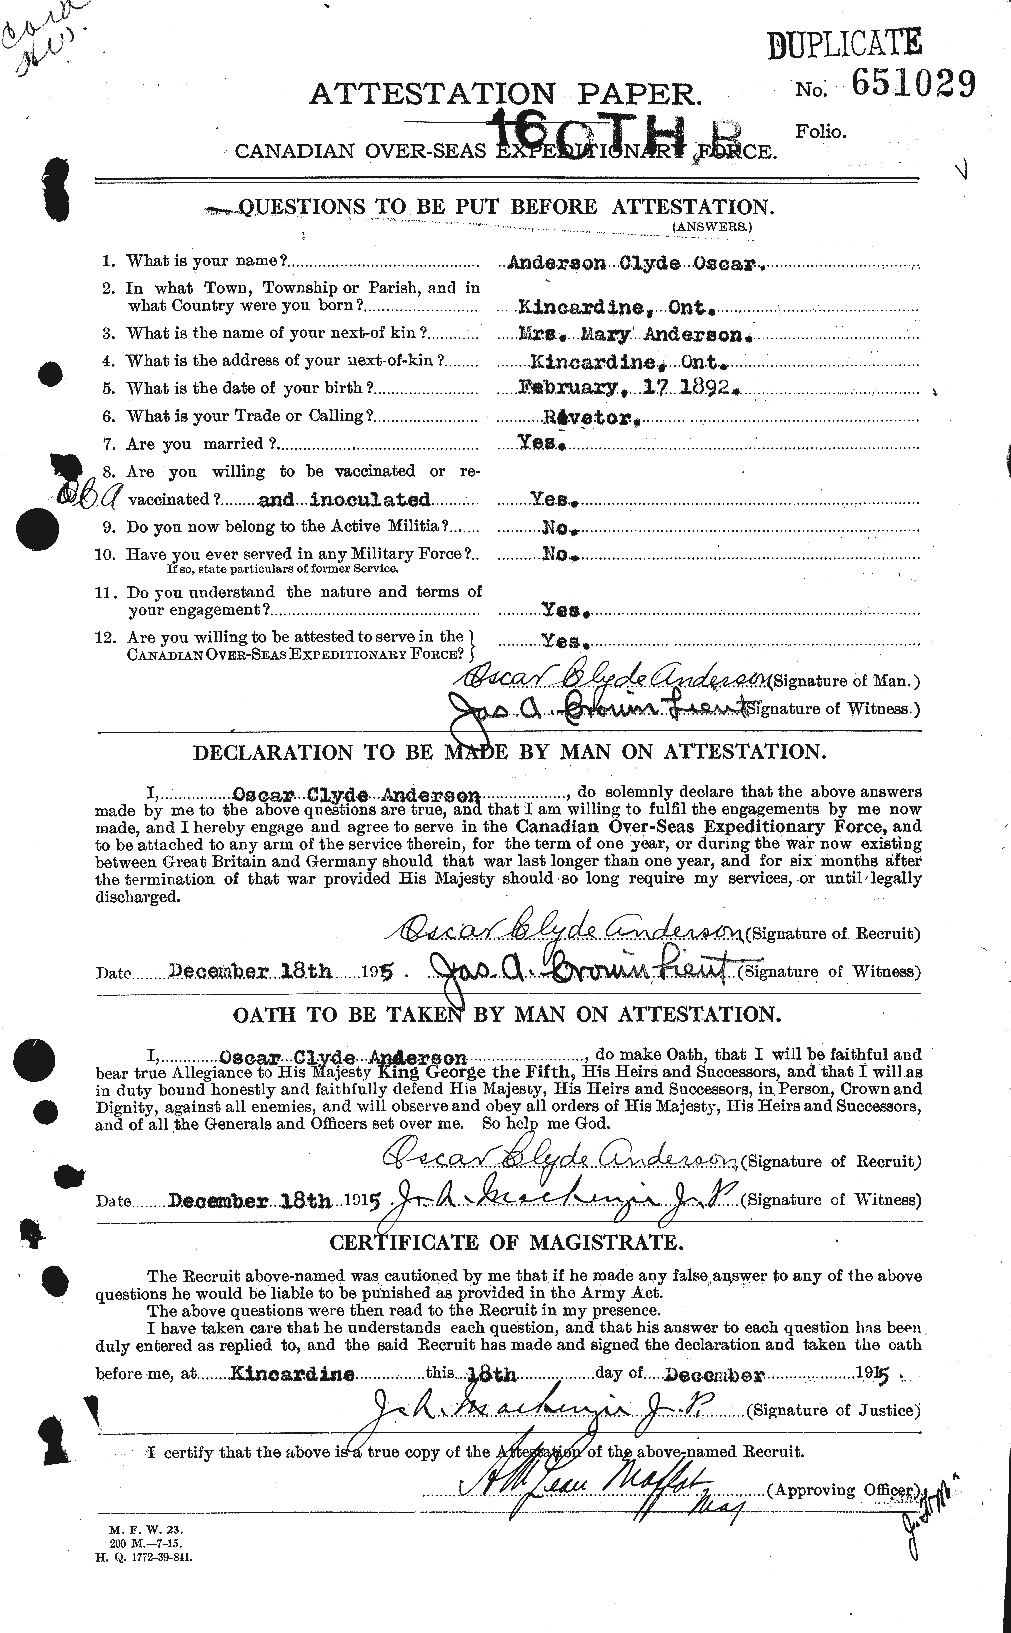 Personnel Records of the First World War - CEF 207379a